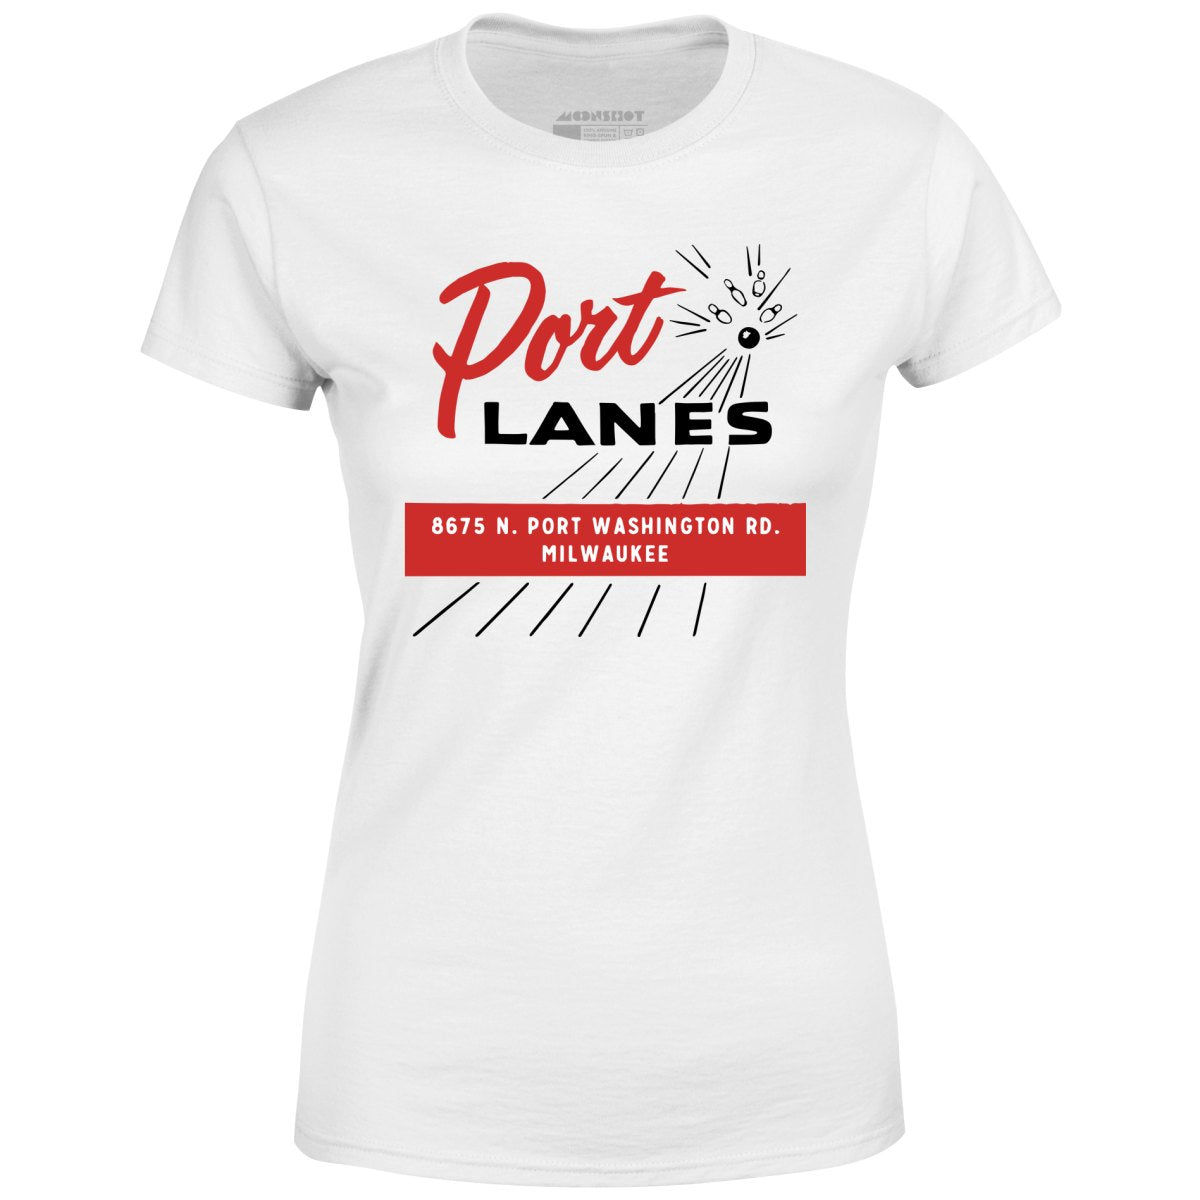 Port Lanes - Milwaukee, WI - Vintage Bowling Alley - Women's T-Shirt